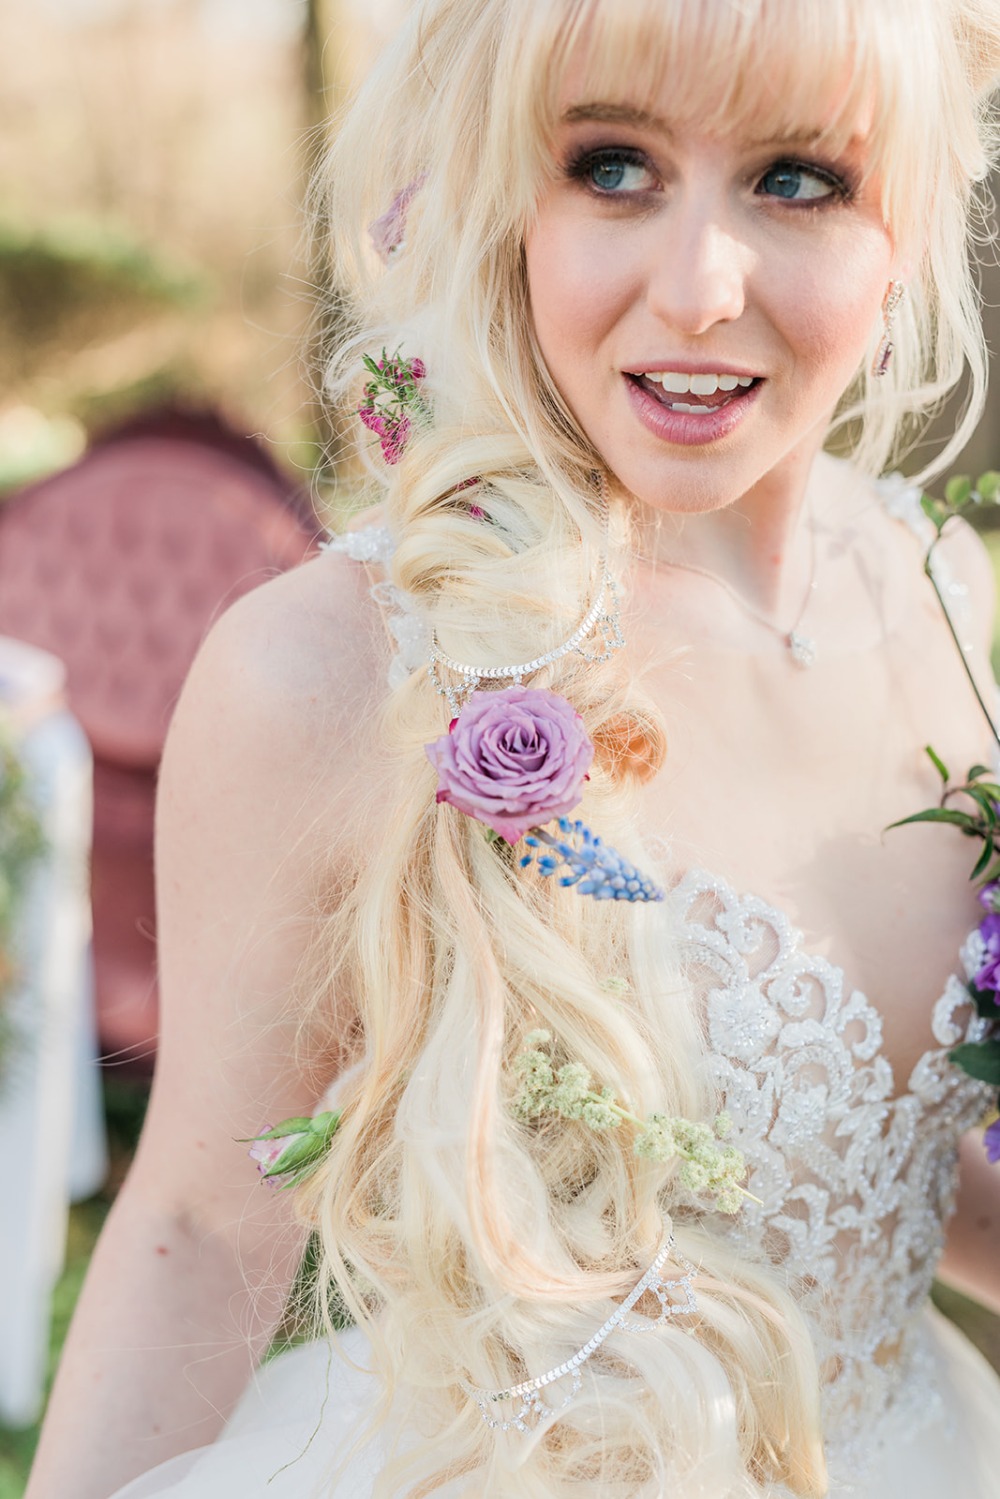 What Your Fantasy Rapunzel Wedding Could Look Like